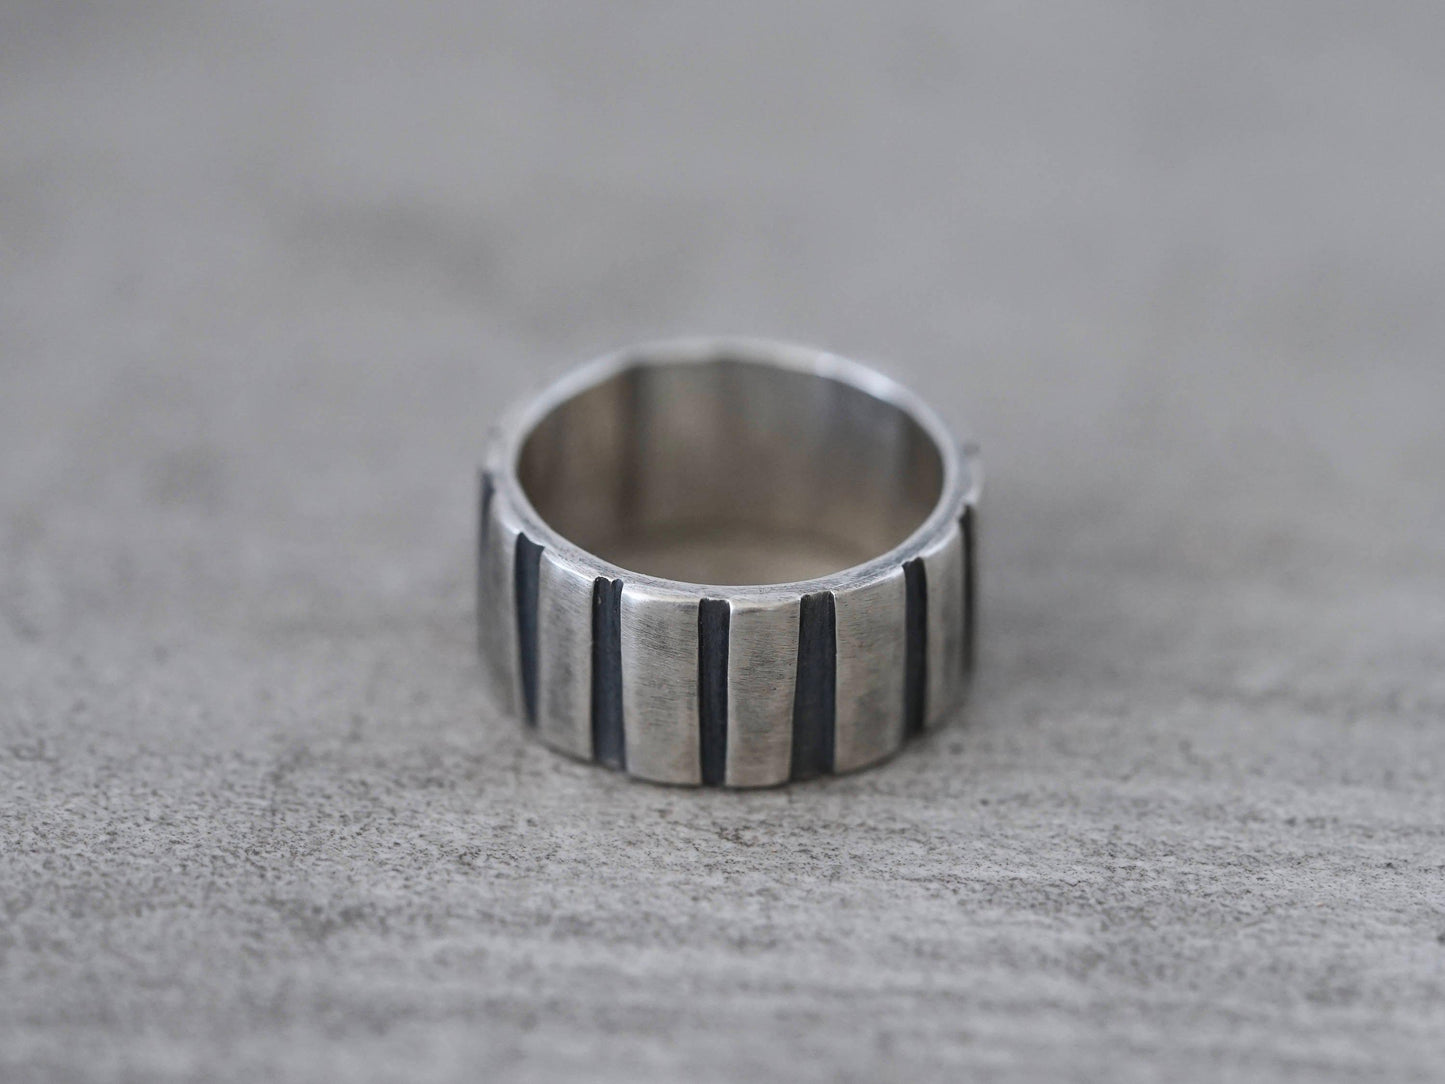 striped sterling silver ring, size 9